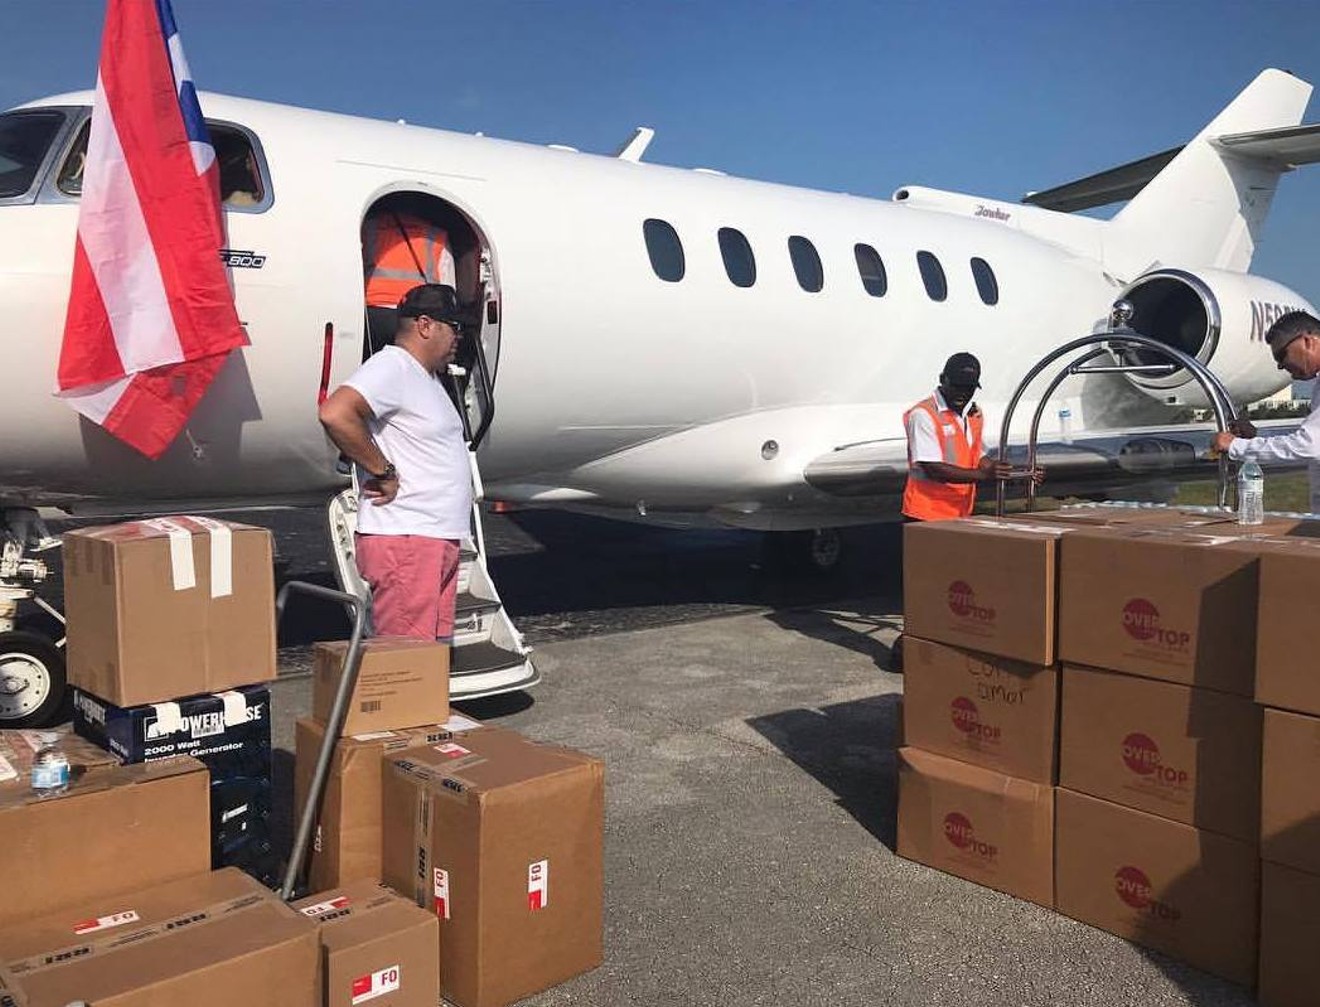 Volunteers load supplies for hurricane victims onto an airplane.